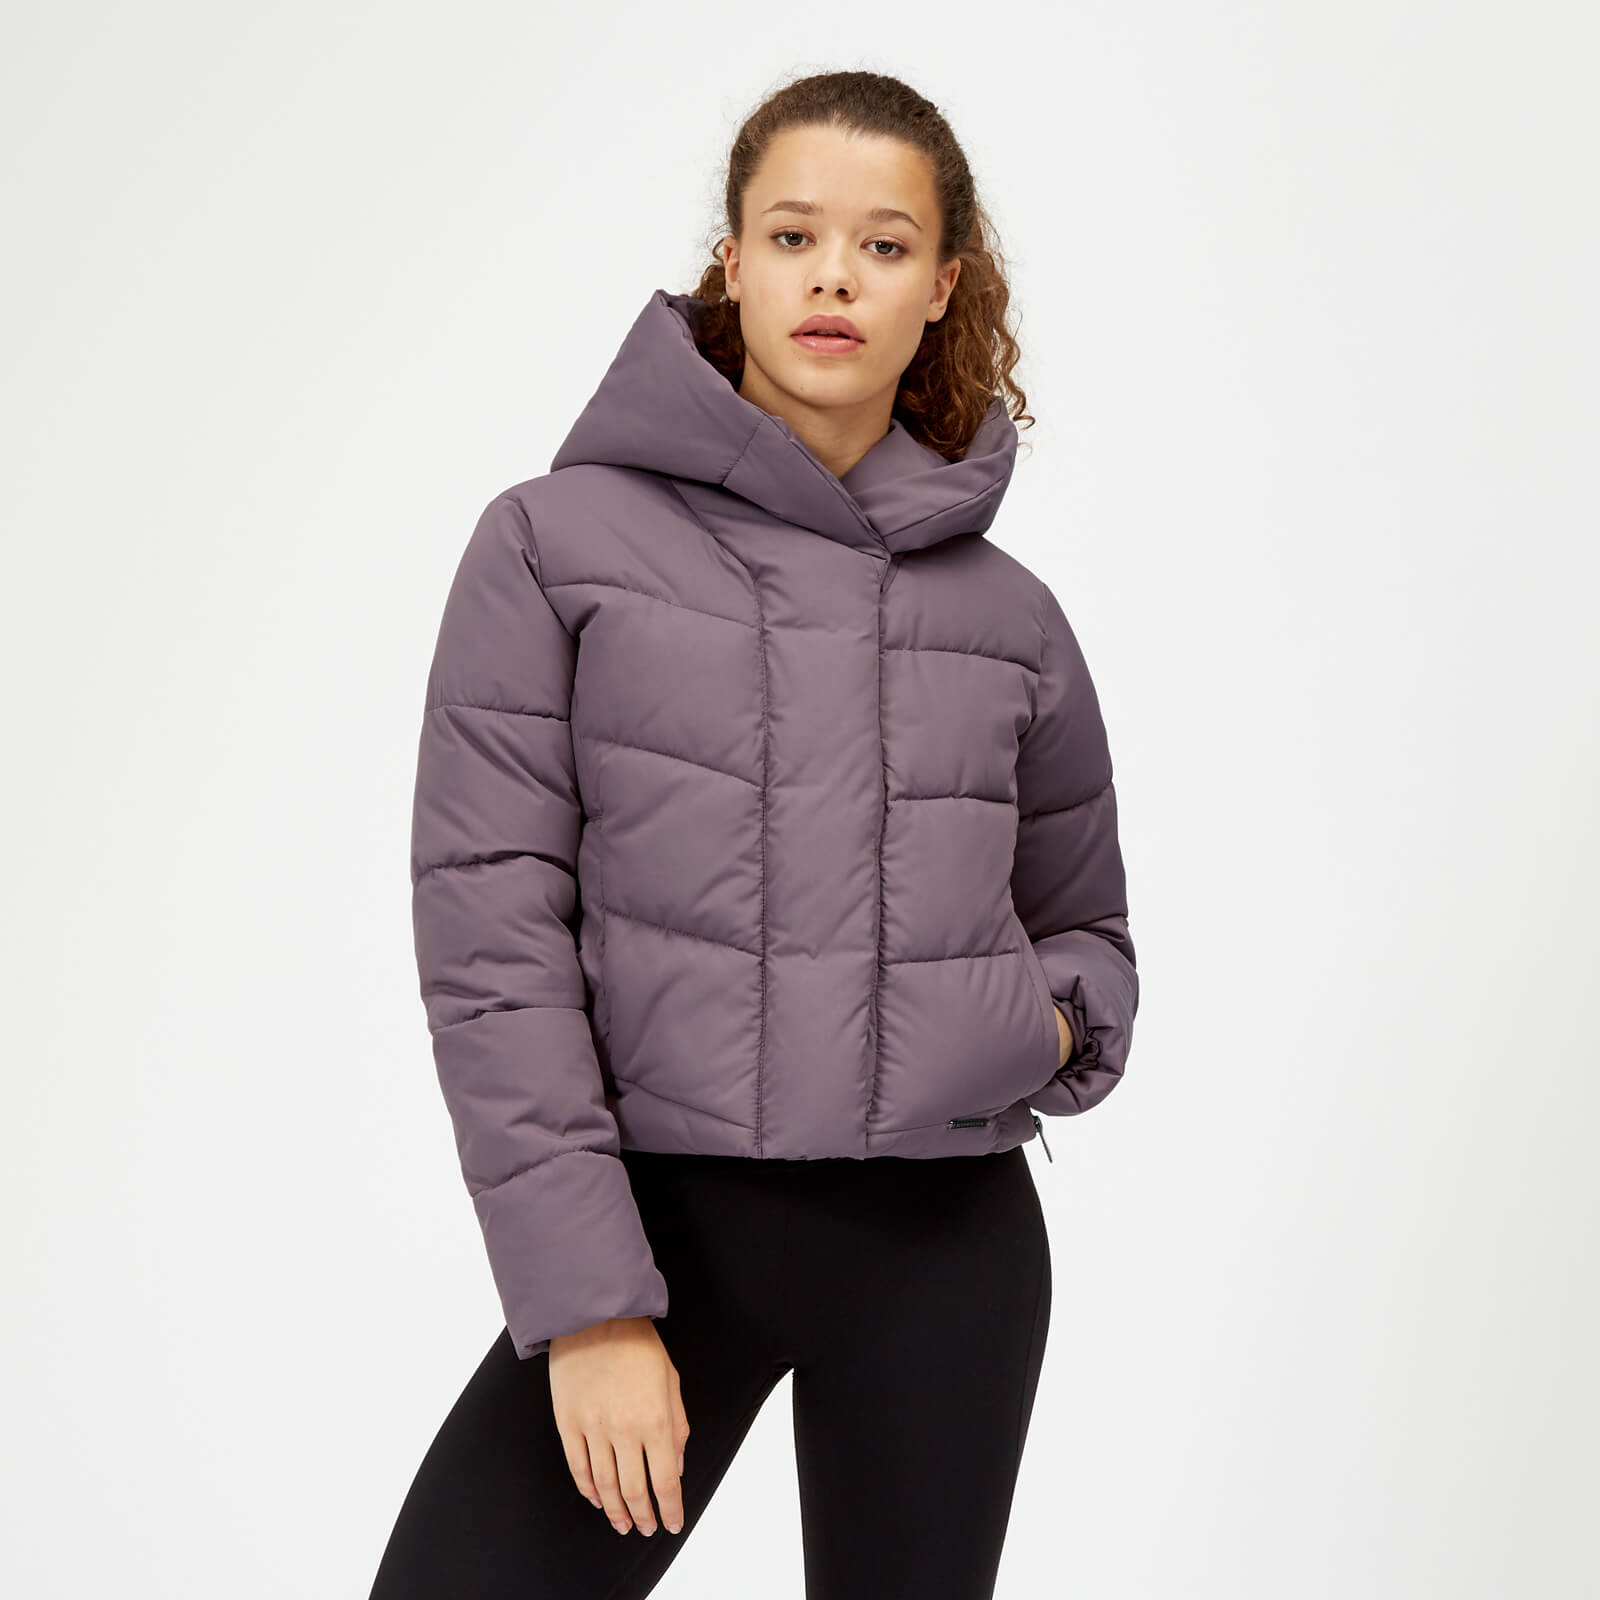 Myprotein Pro Tech Protect Puffer Jacket - Mauve - M